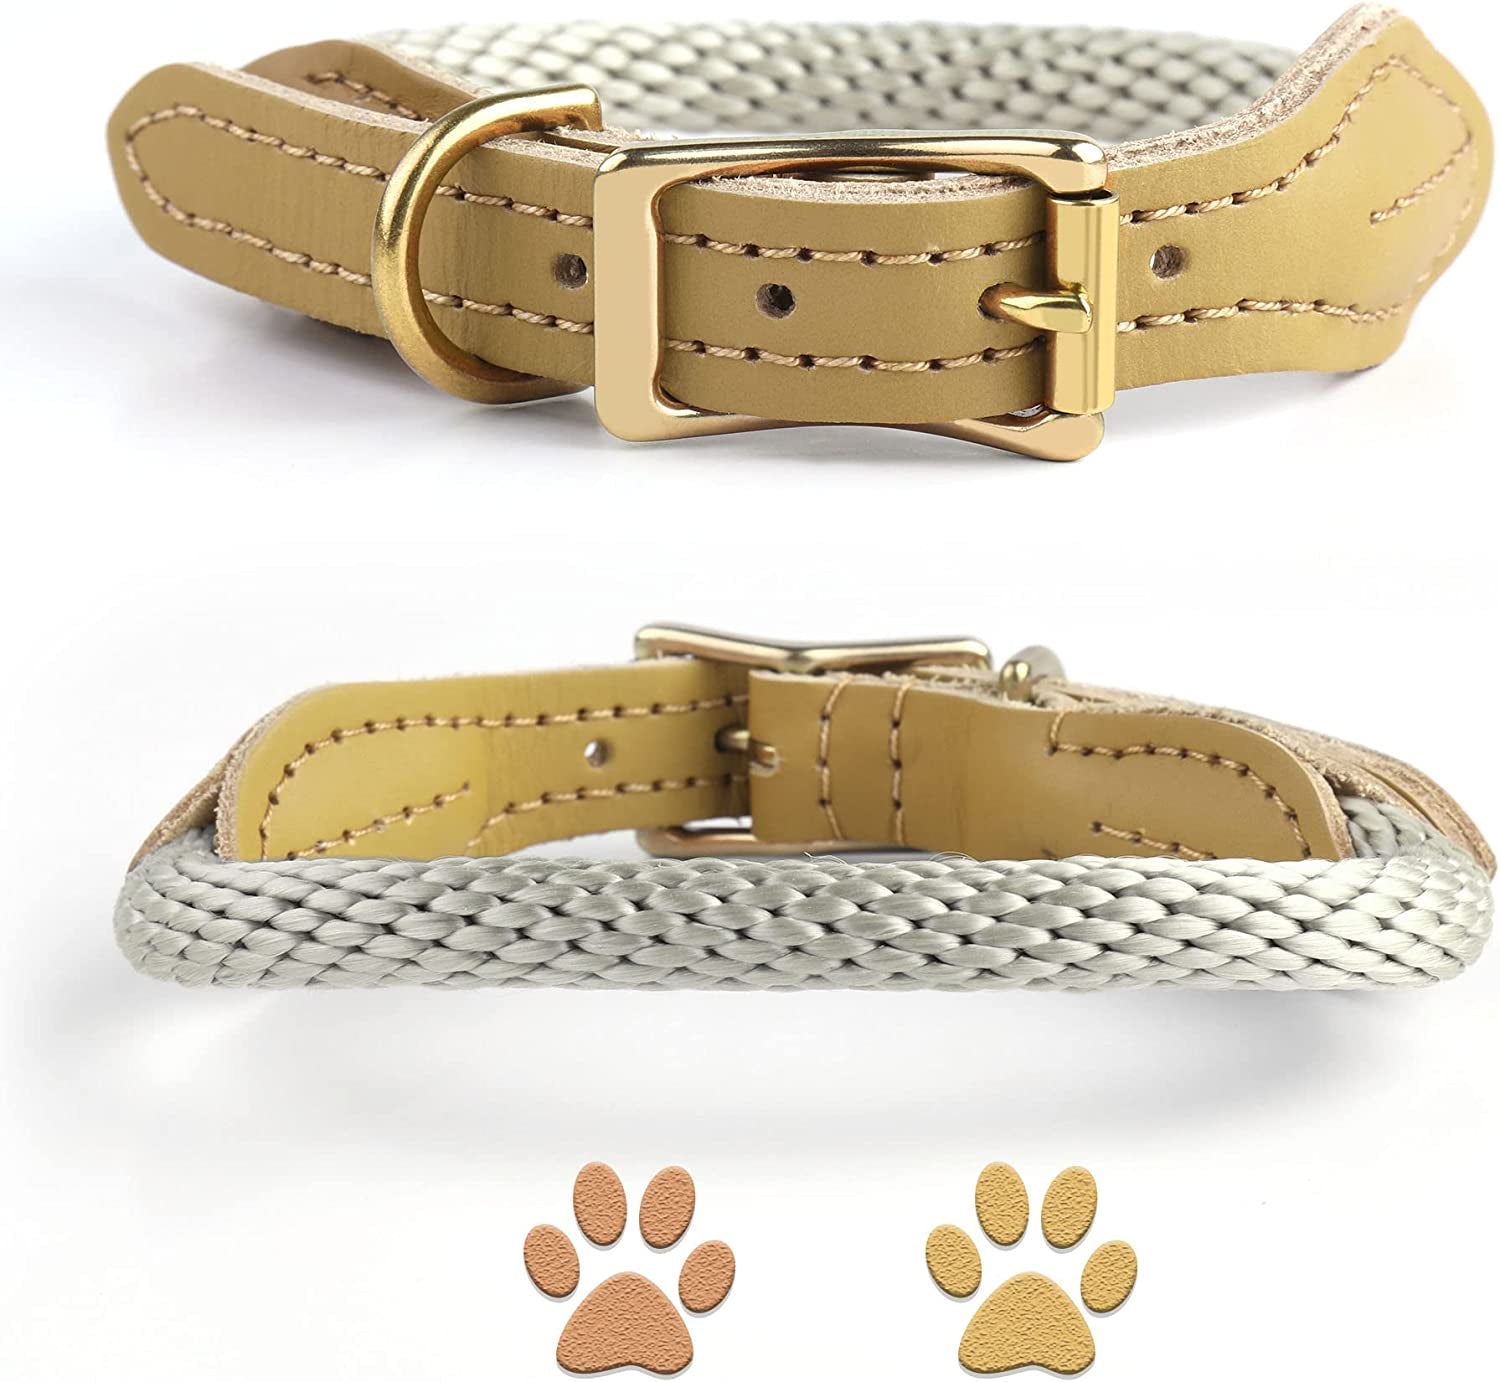 Decorbea Airtag Holder- Airtag Dog Collar Holder(2 Pack)- Dog Airtag Holder in Fashionable Design -PU Leather Pet Collar Case for Apple Airtags Electronics > GPS Accessories > GPS Cases Decorbea Khaki Dog Collars (Pack of 1) Collar(S):9.8"-12.2" 